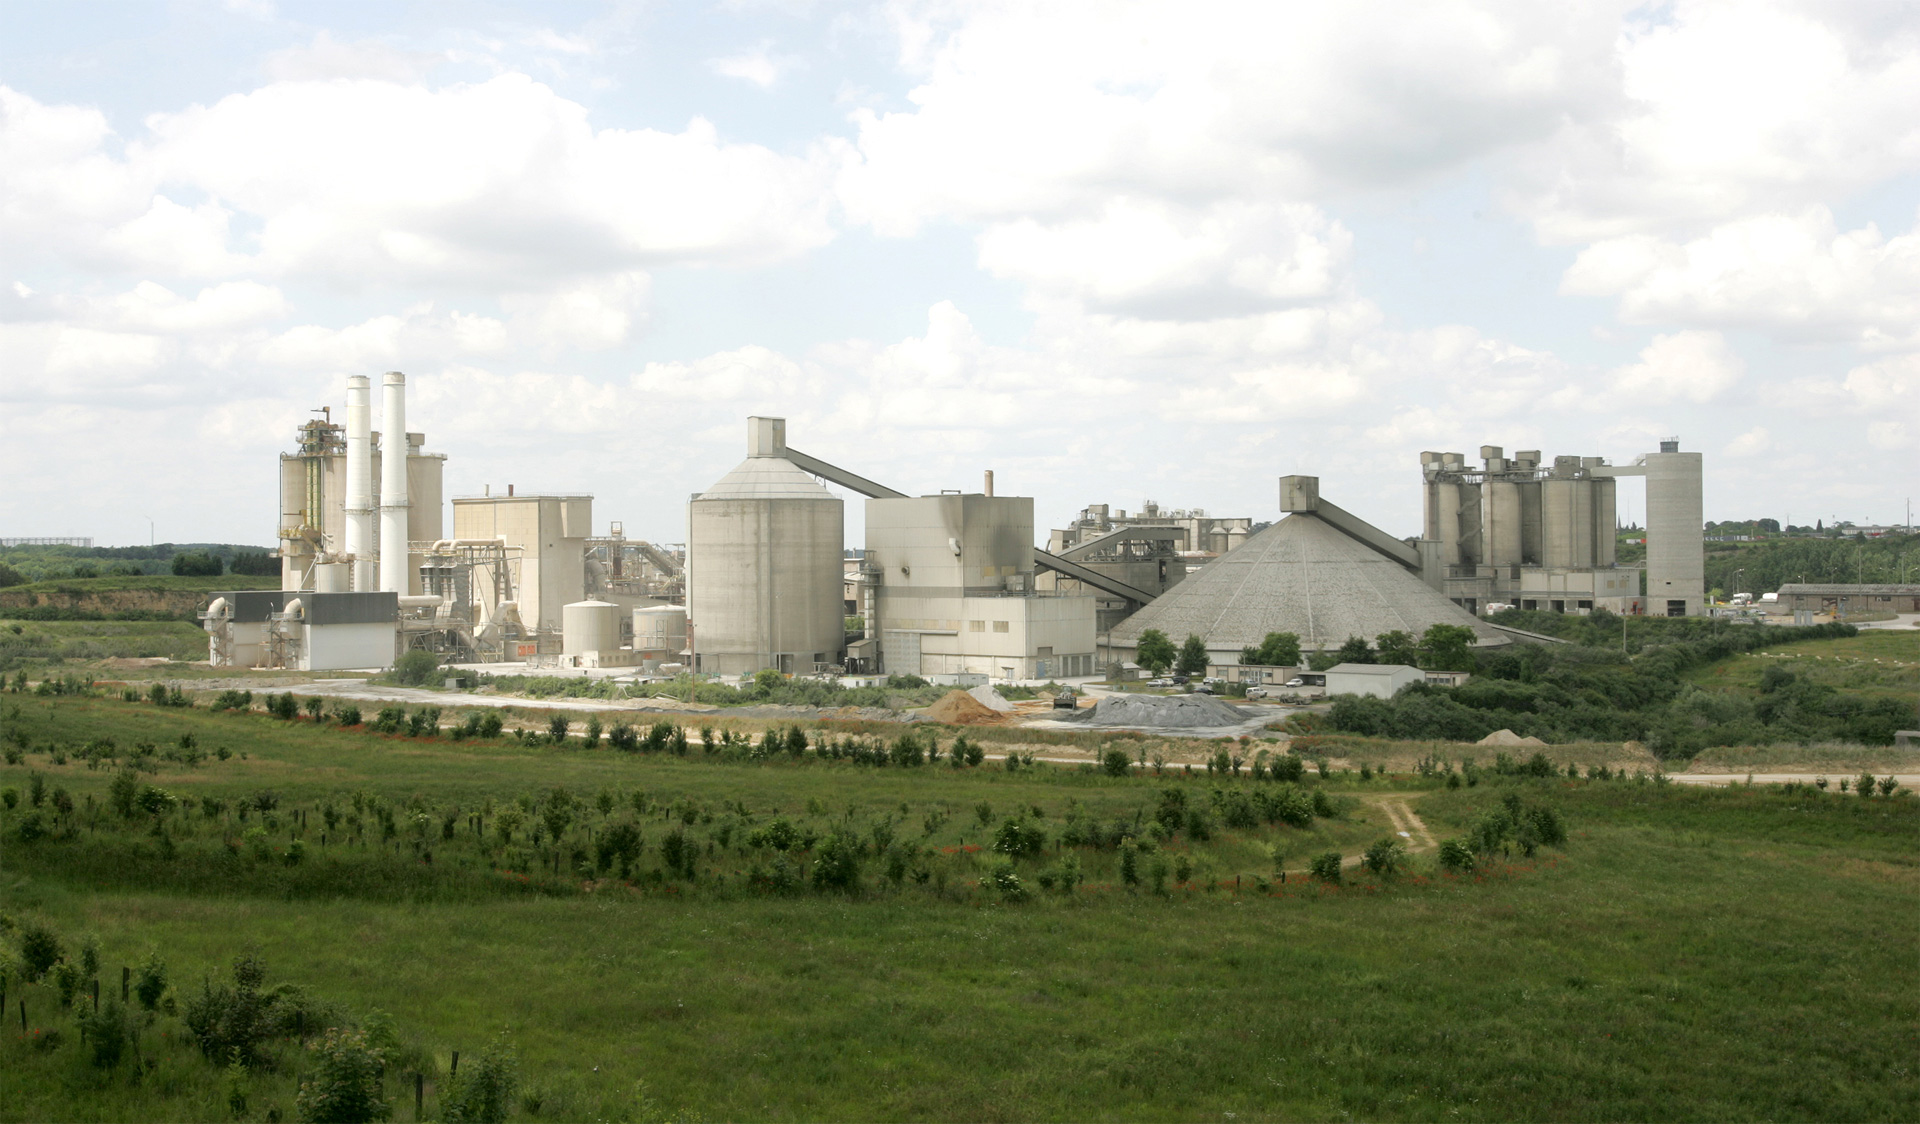 Industrial cement plant with silos amidst green fields under a cloudy sky